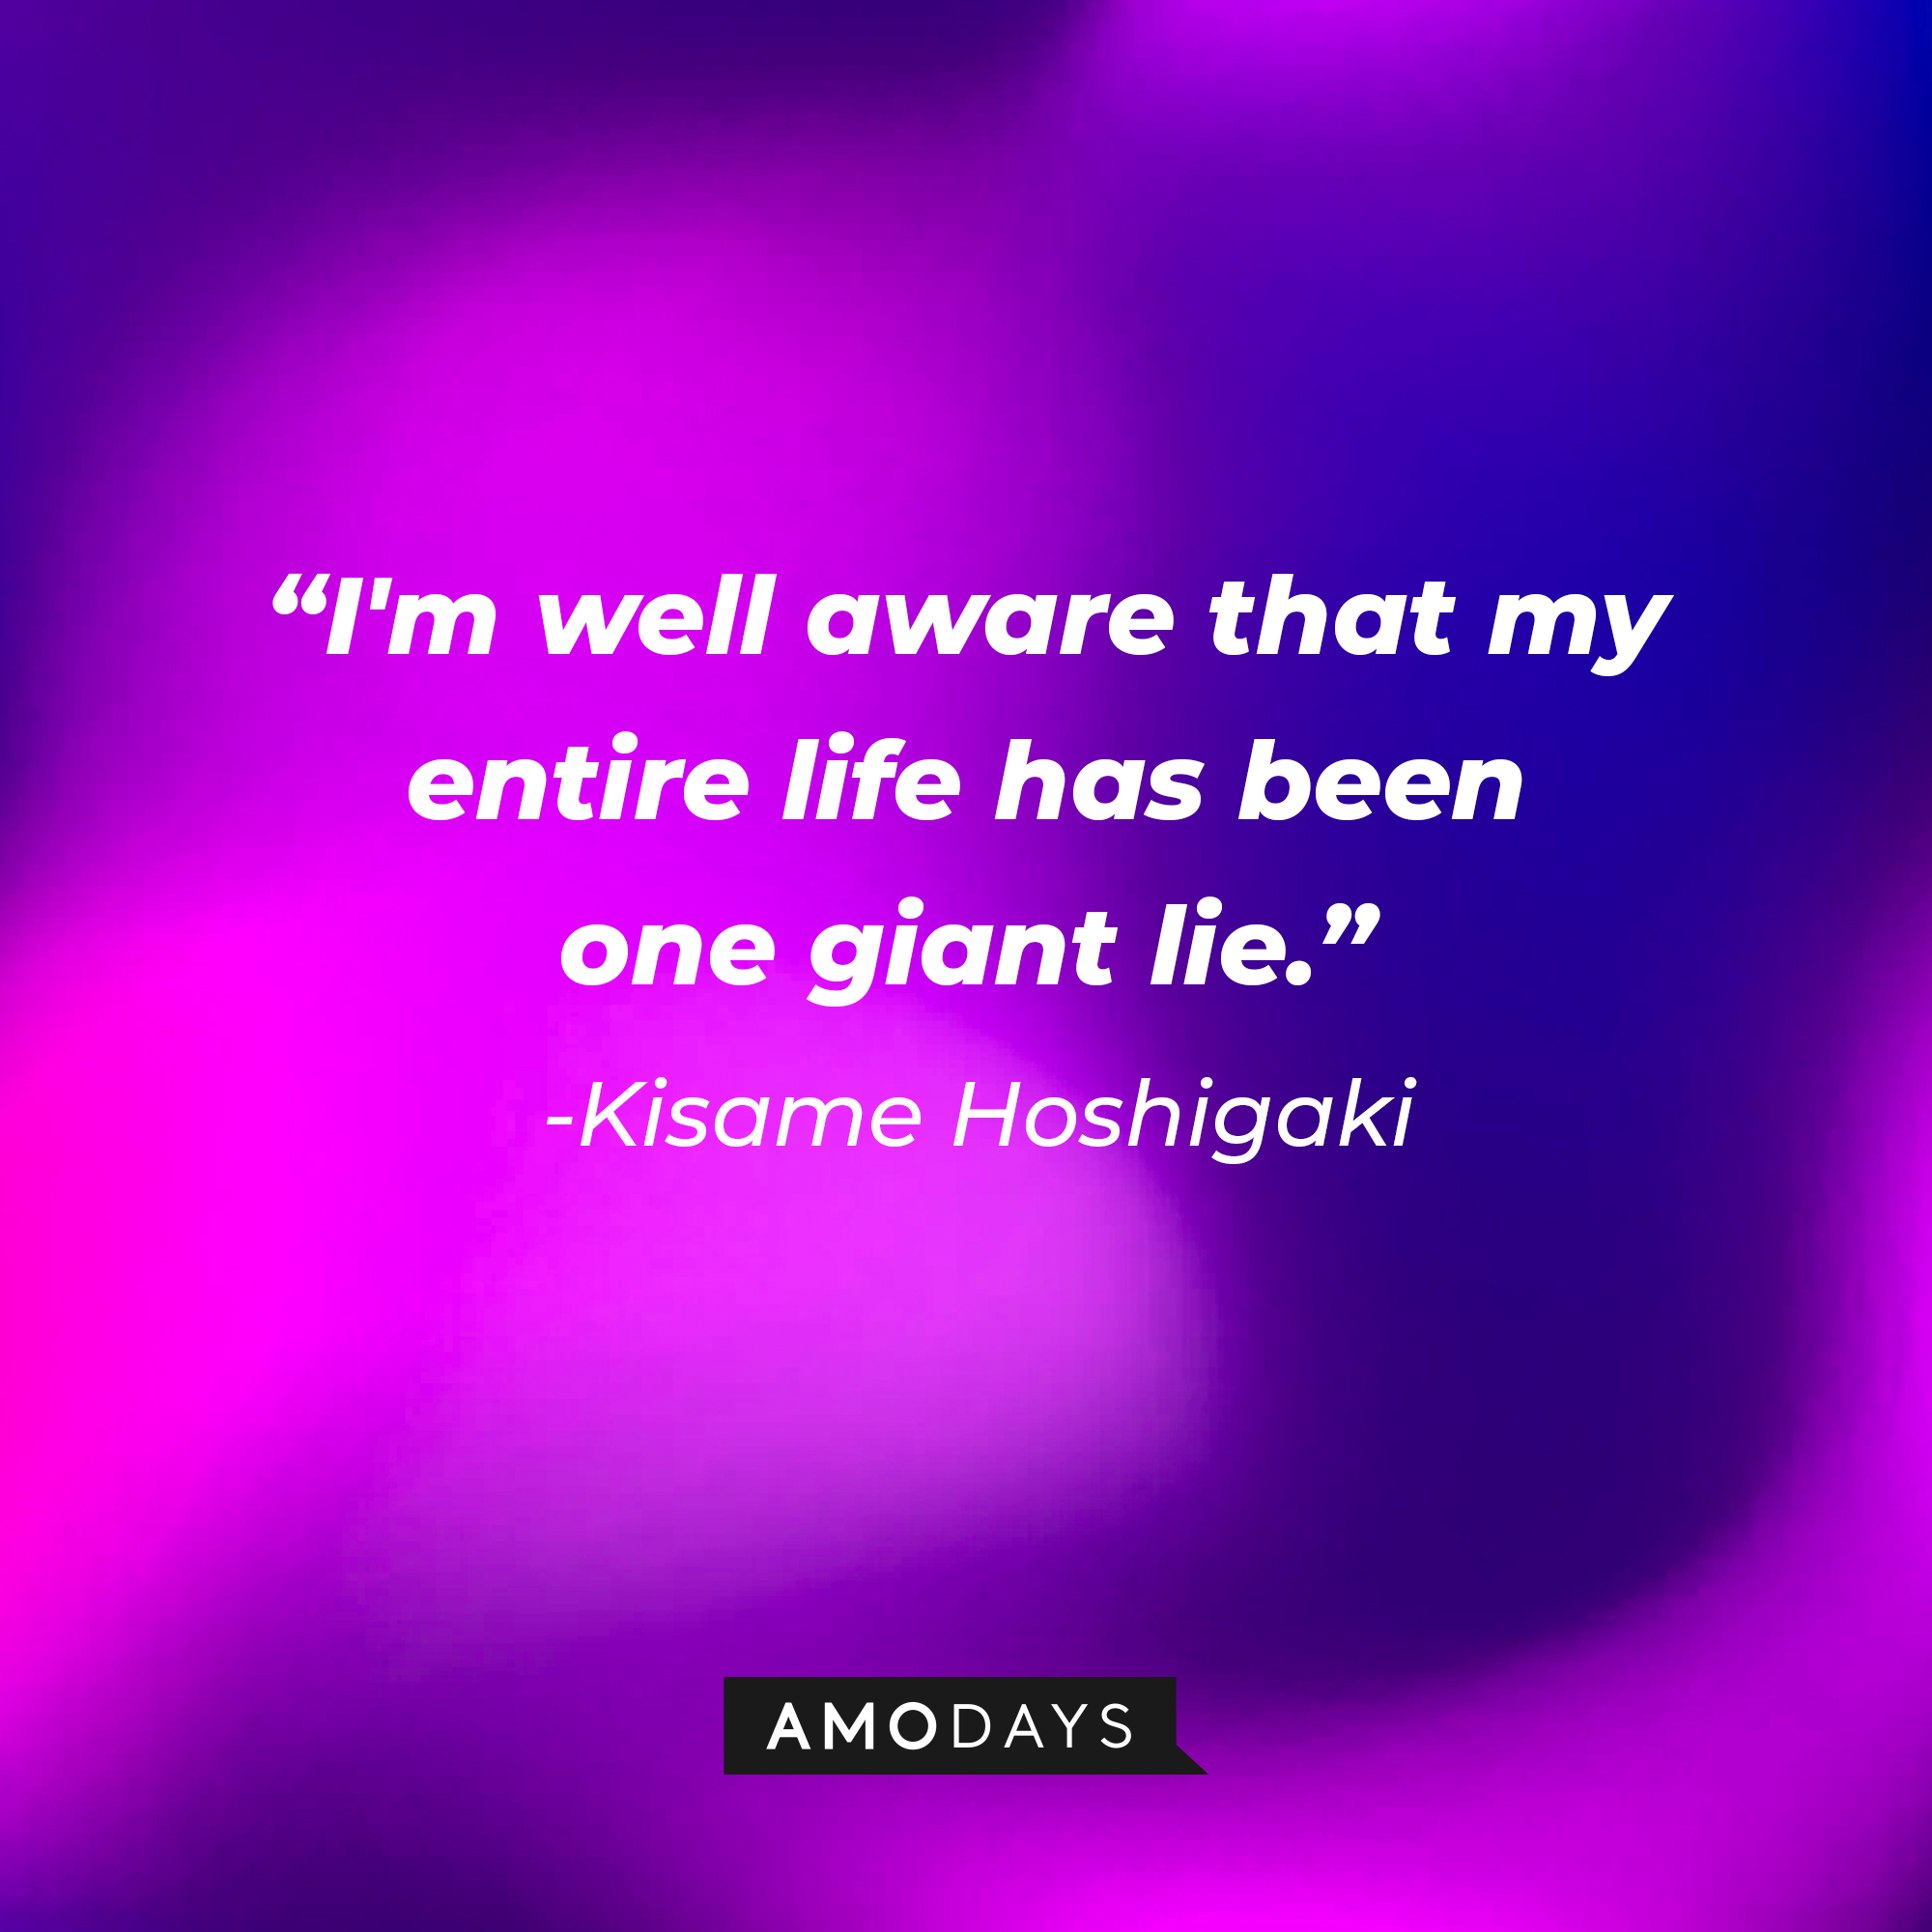 Kisame Hoshigaki’s quote: “I'm well aware that my entire life has been one giant lie." | Source: AmoDays